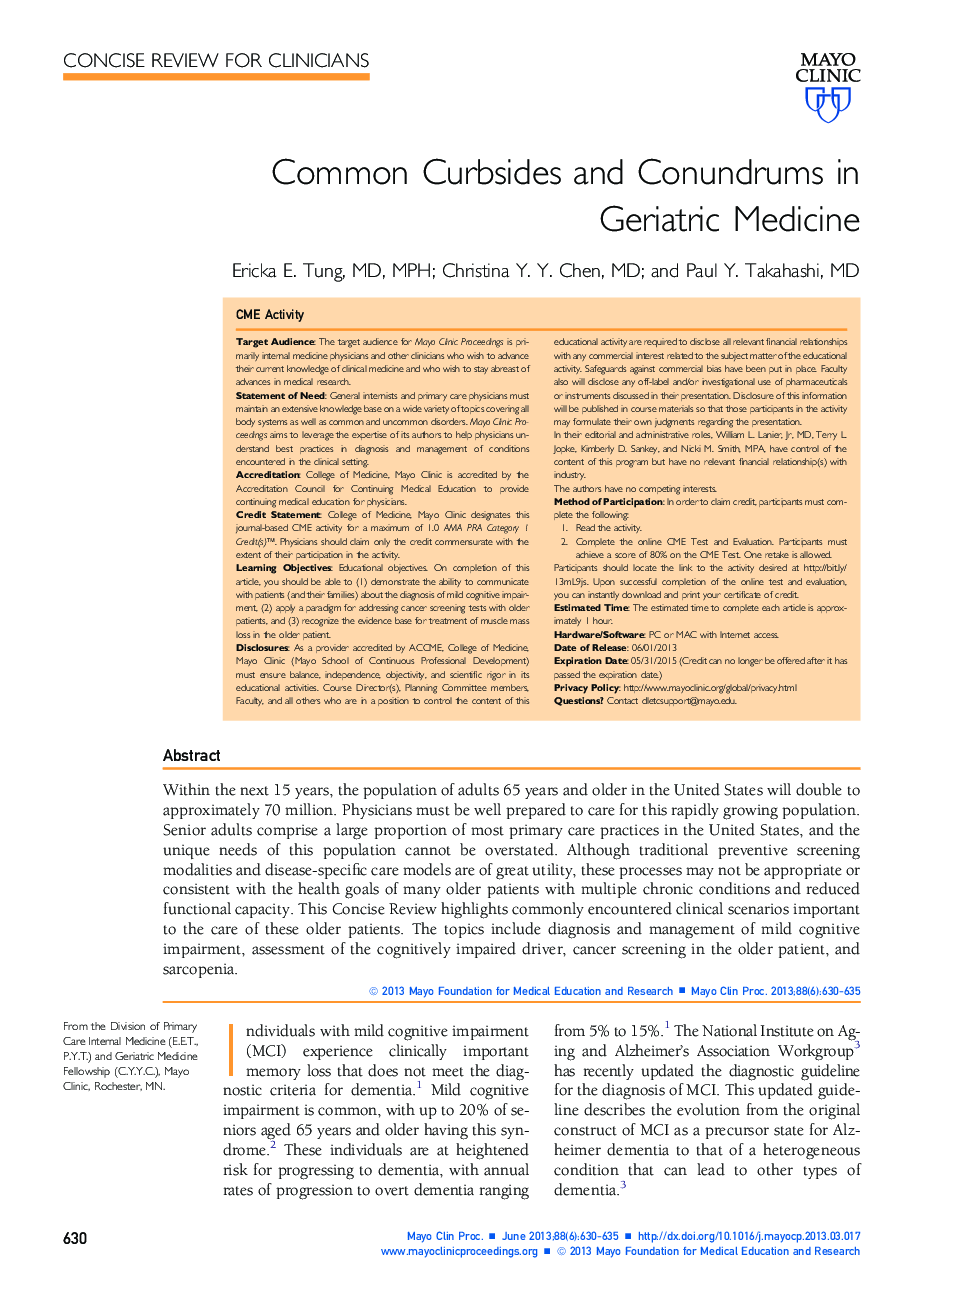 Common Curbsides and Conundrums in Geriatric Medicine